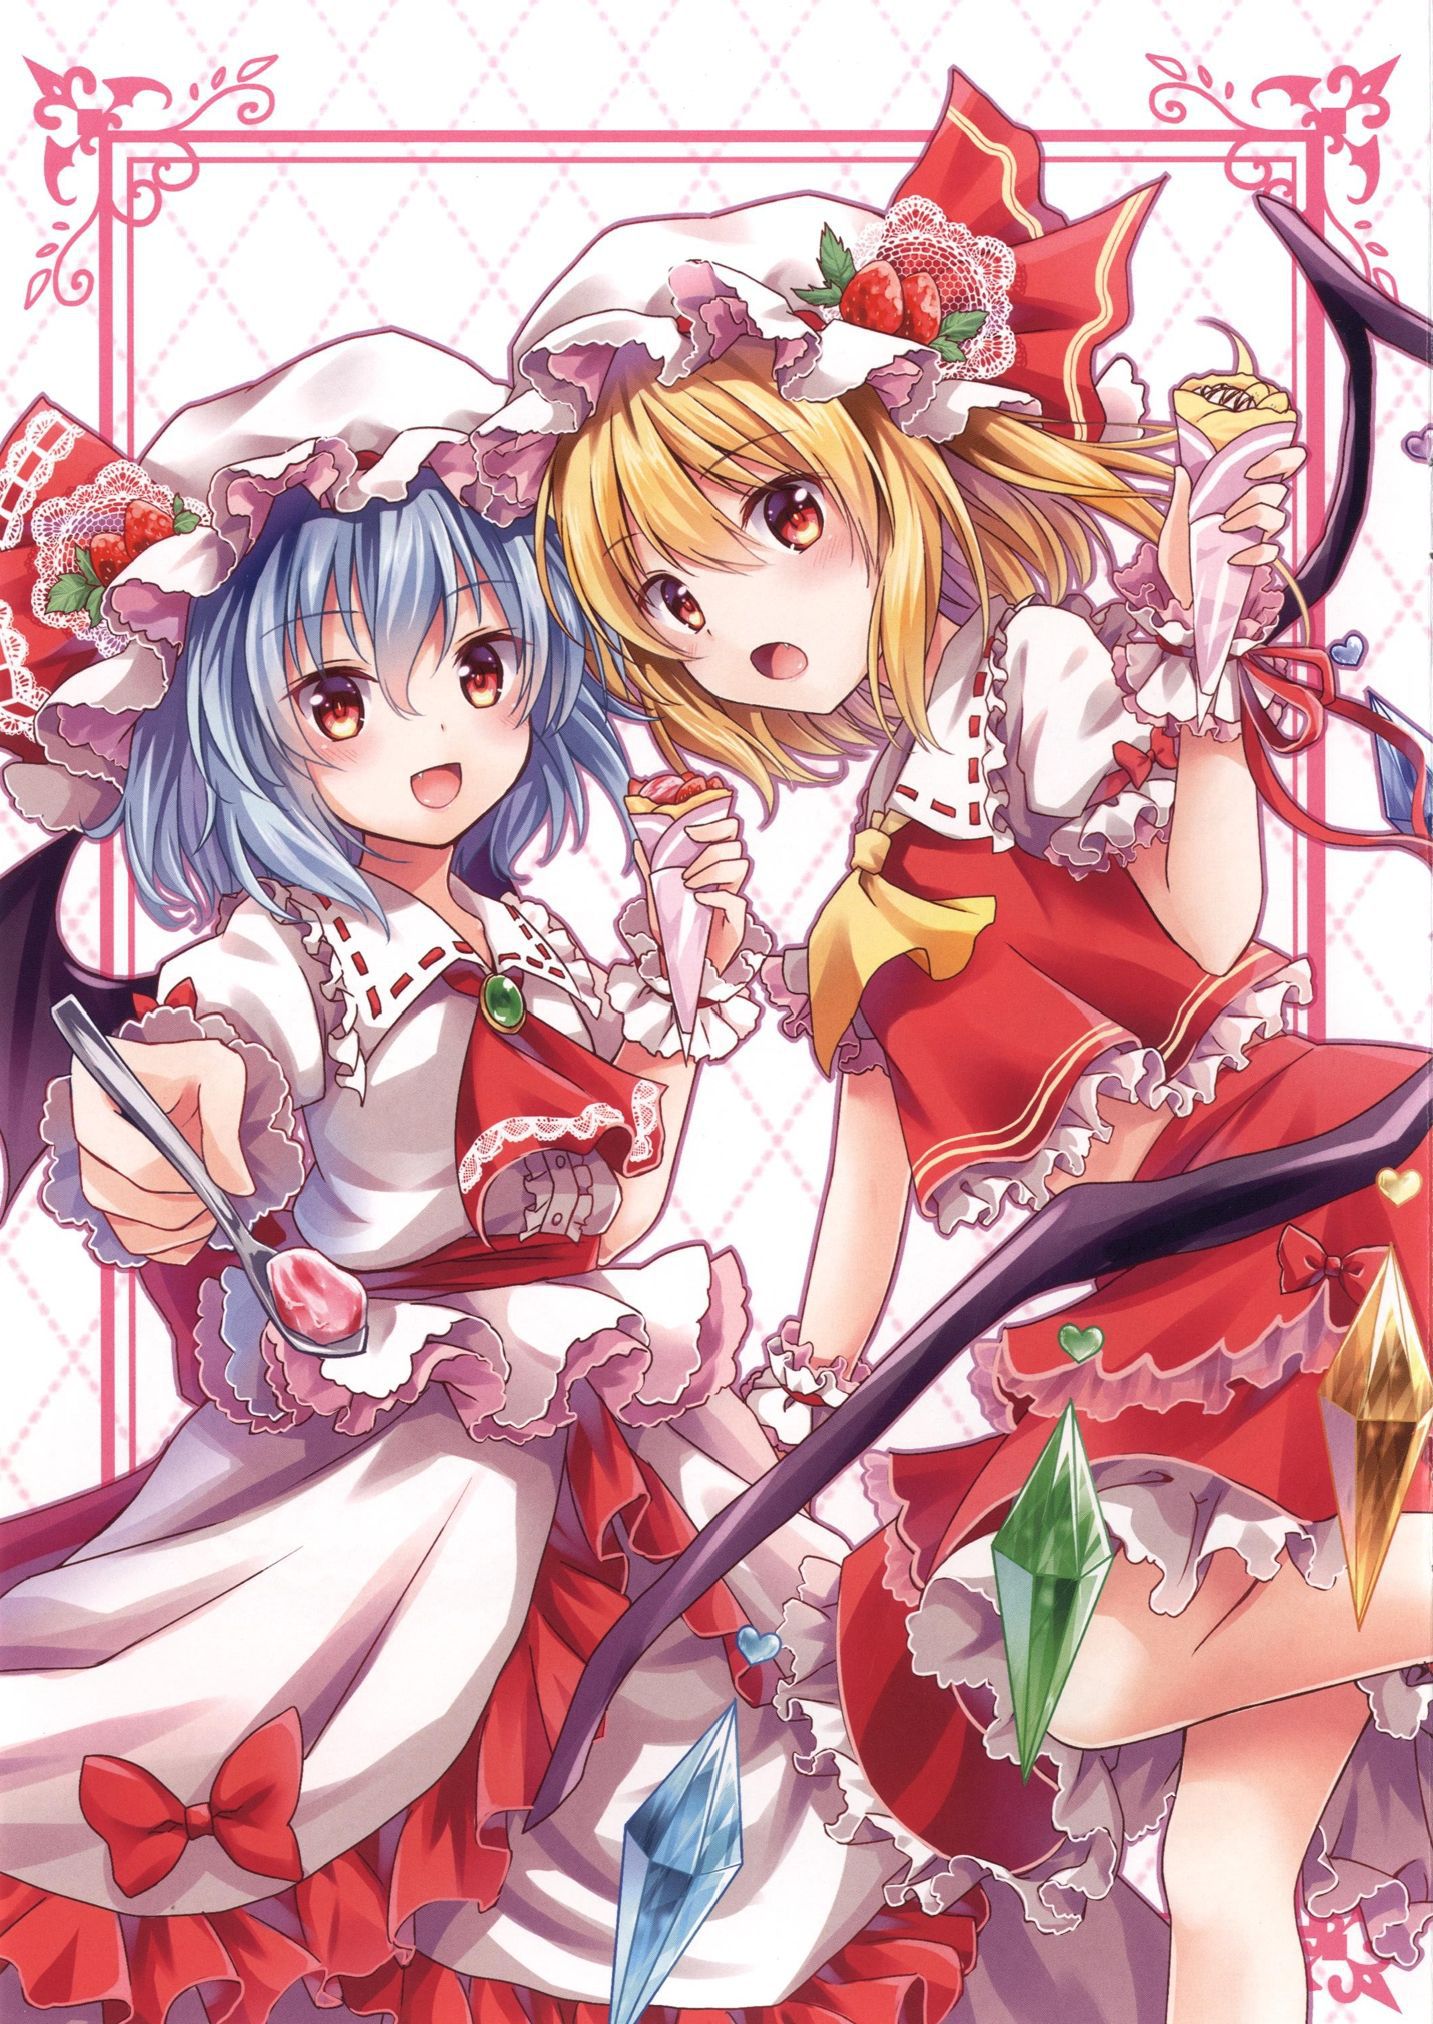 [Secondary erotic] [East] shyness with metrosexual panties Flandre Scarlet-Chan Cute Girly pictures www1 16